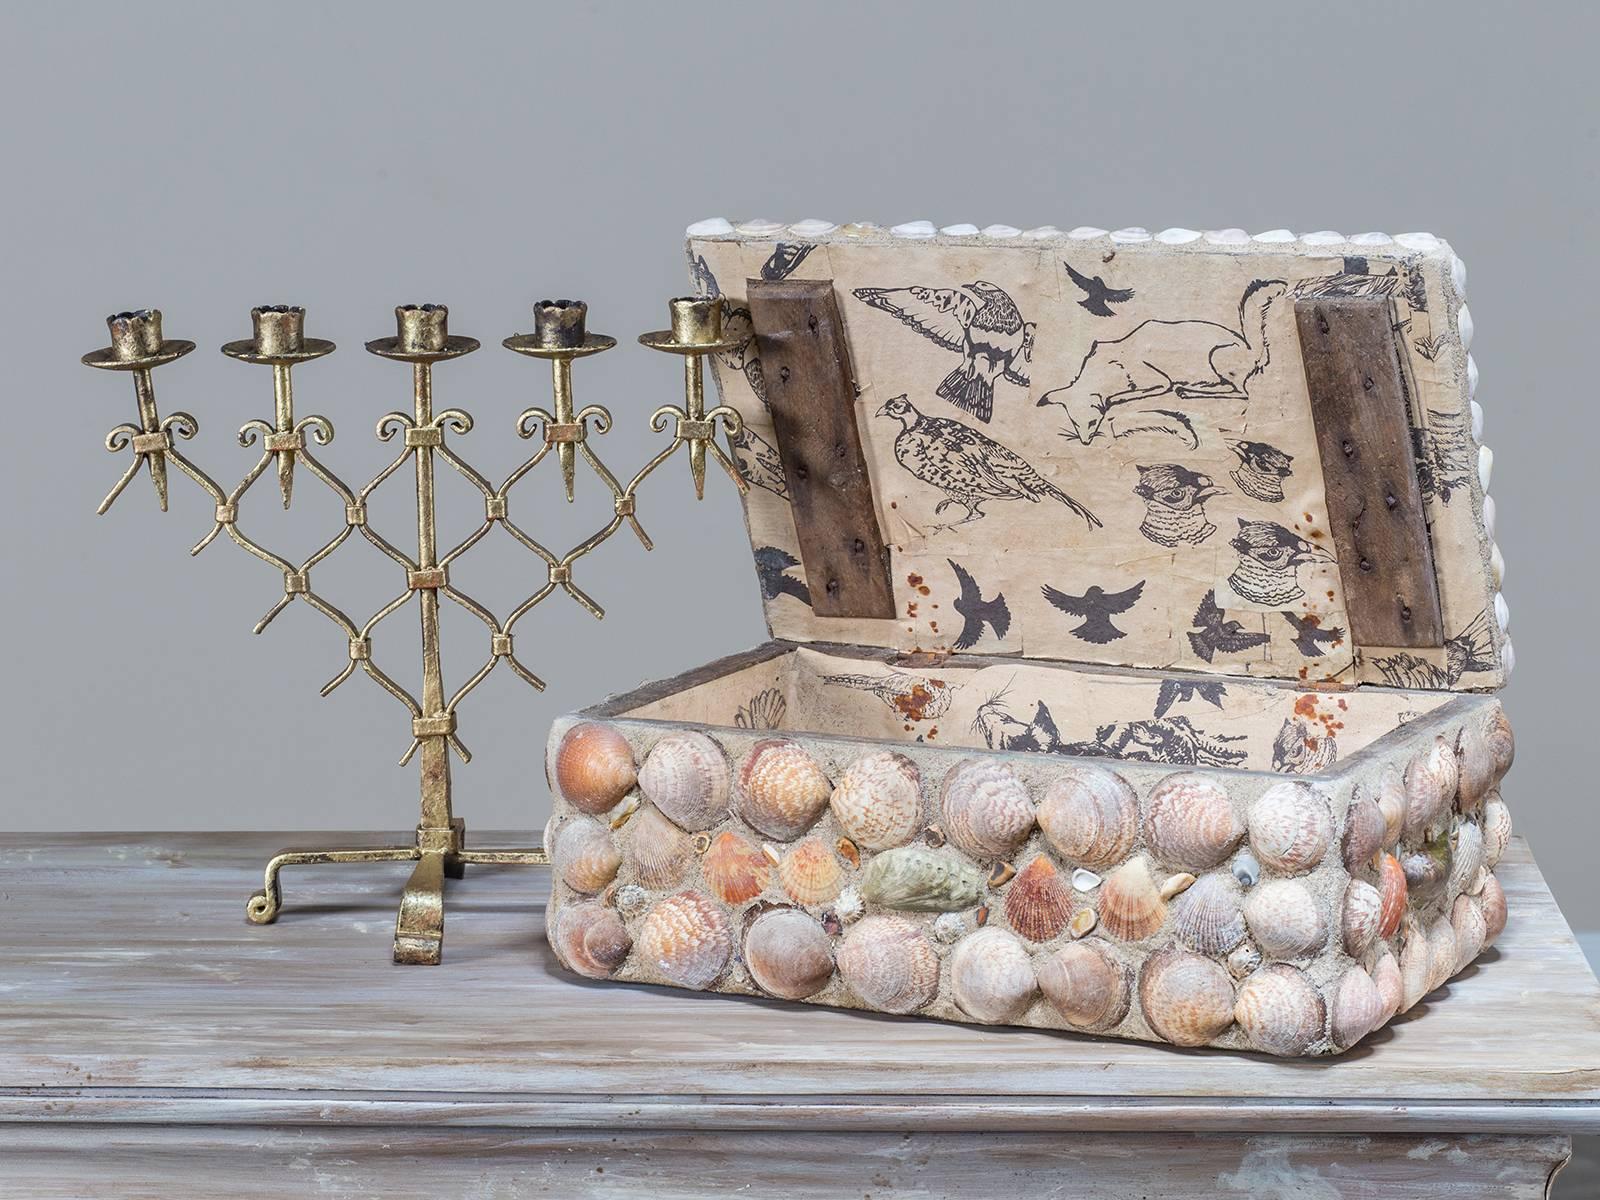 The grand scale of this vintage French sea shell box circa 1940 is most impressive. Every surface has been adorned with a variety of shells including the top where a large central medallion contains the largest shell. The wooden box has been coated